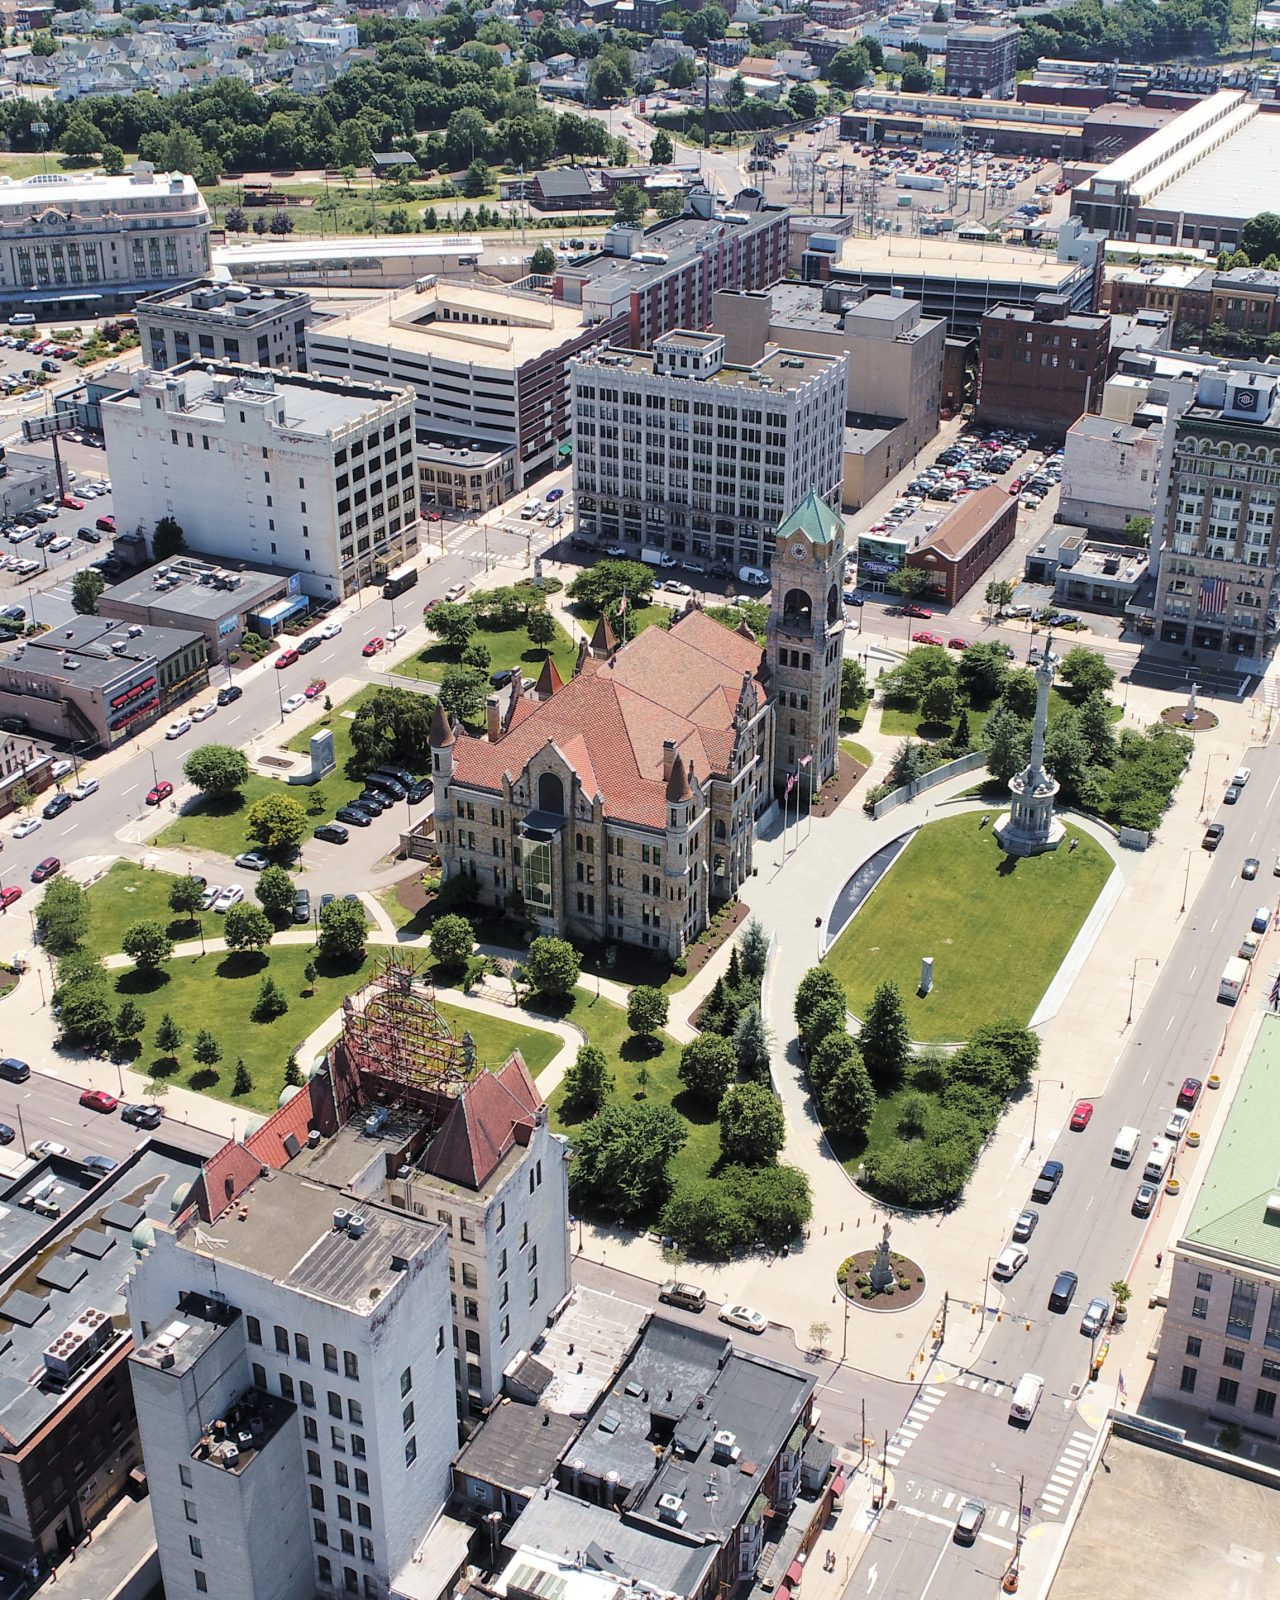 Courthouse Square, Scranton from a drone.